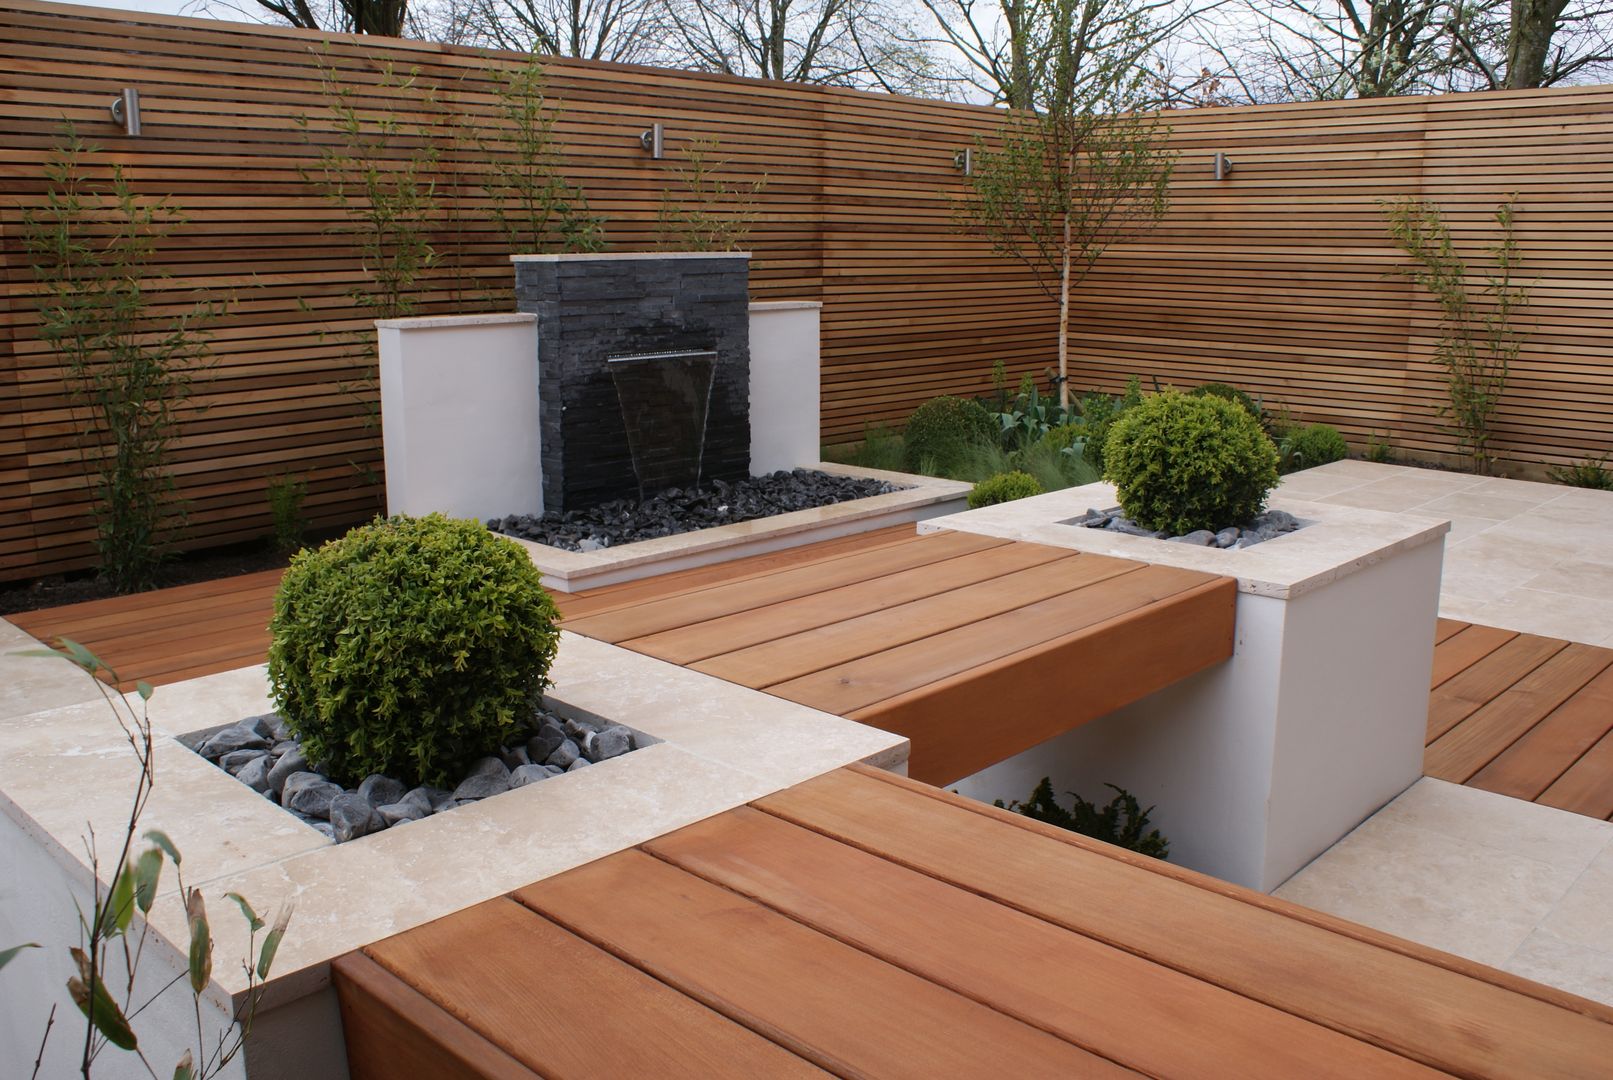 Extended living space - Manchester, Hannah Collins Garden Design Hannah Collins Garden Design